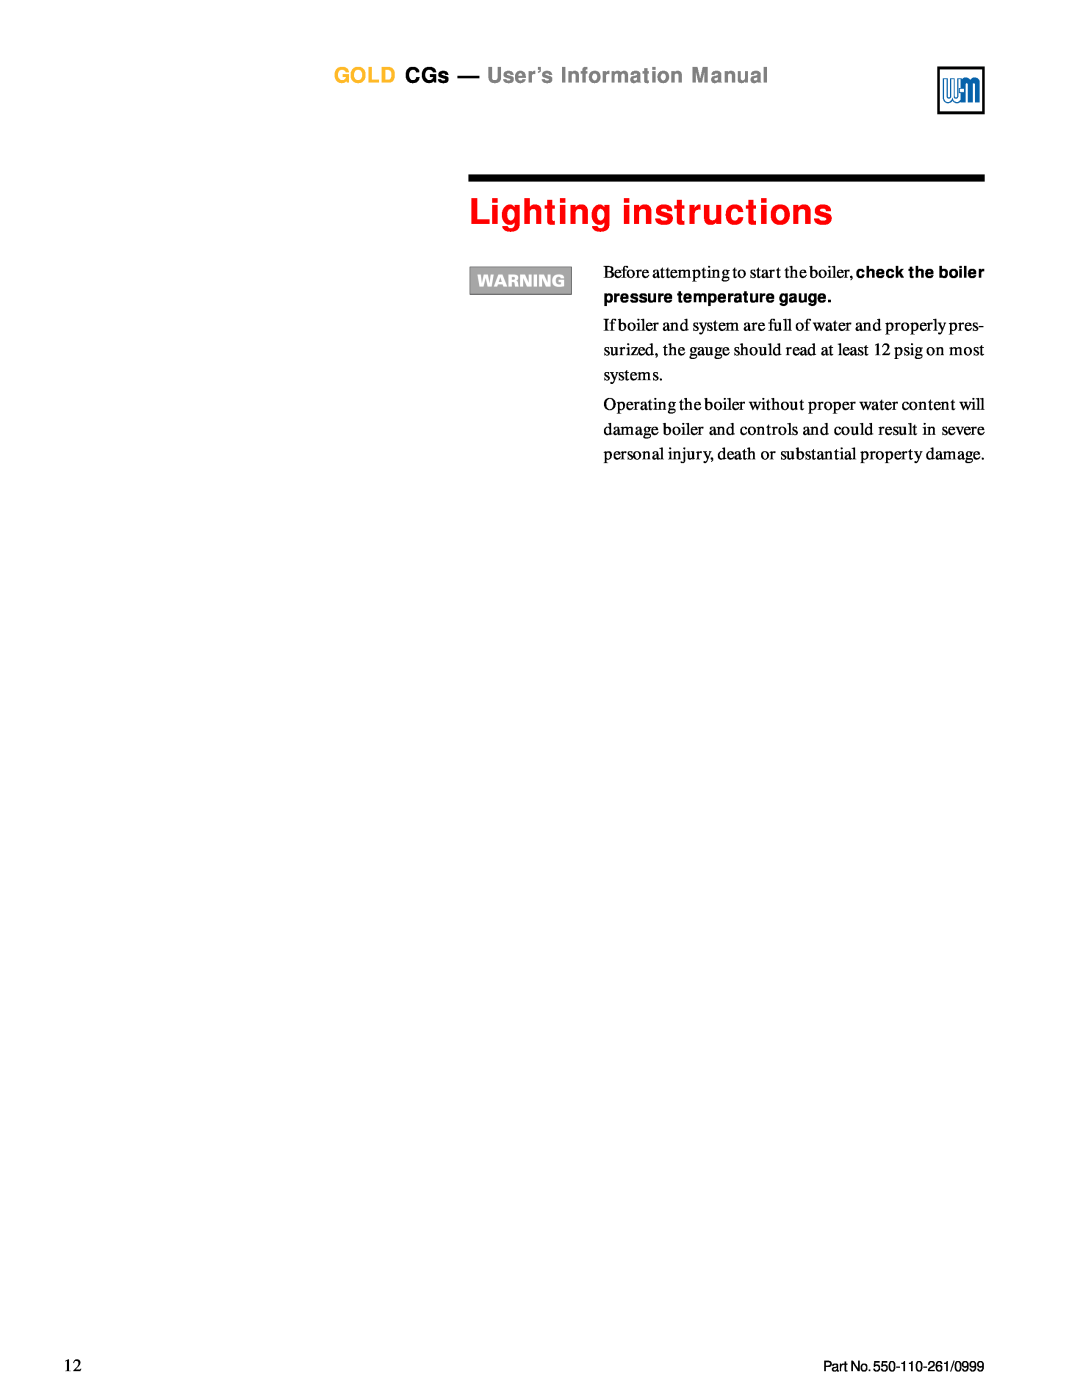 Weil-McLain manual Lighting instructions, GOLD CGs - User’s Information Manual 